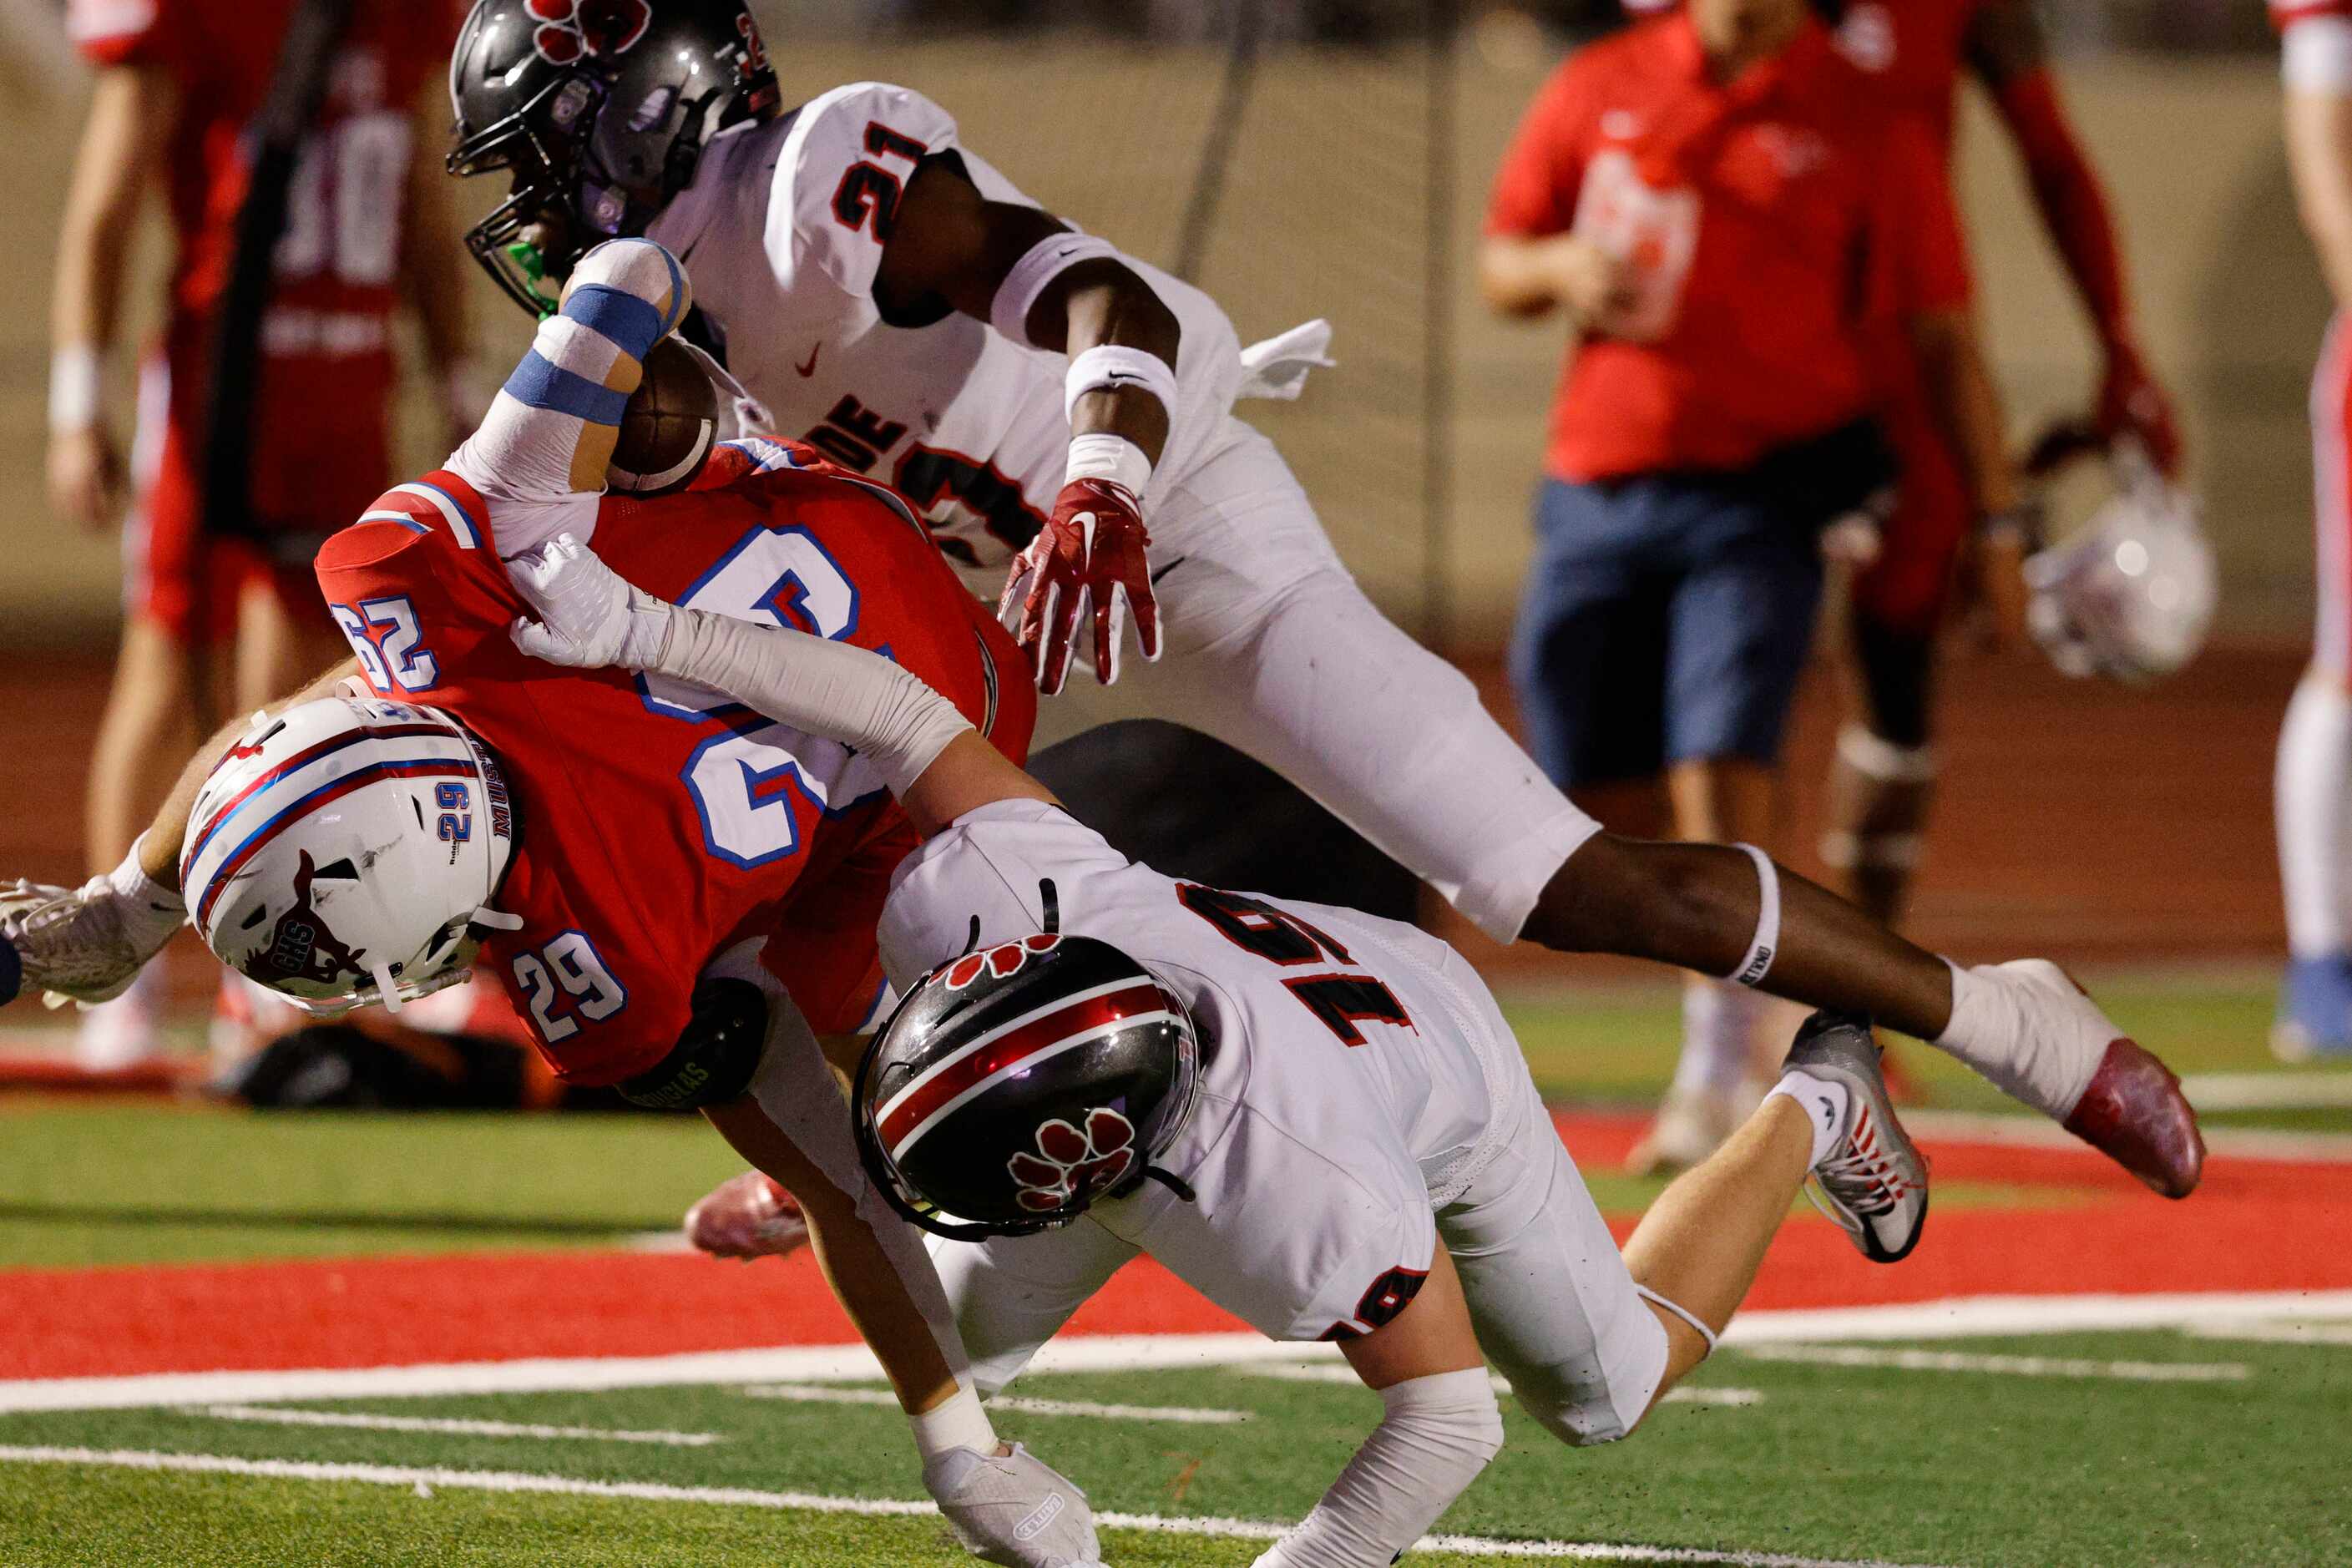 Colleyville Heritage's Bryce Abram (21) and Colleyville Heritage's Alex Burk (19) go to stop...